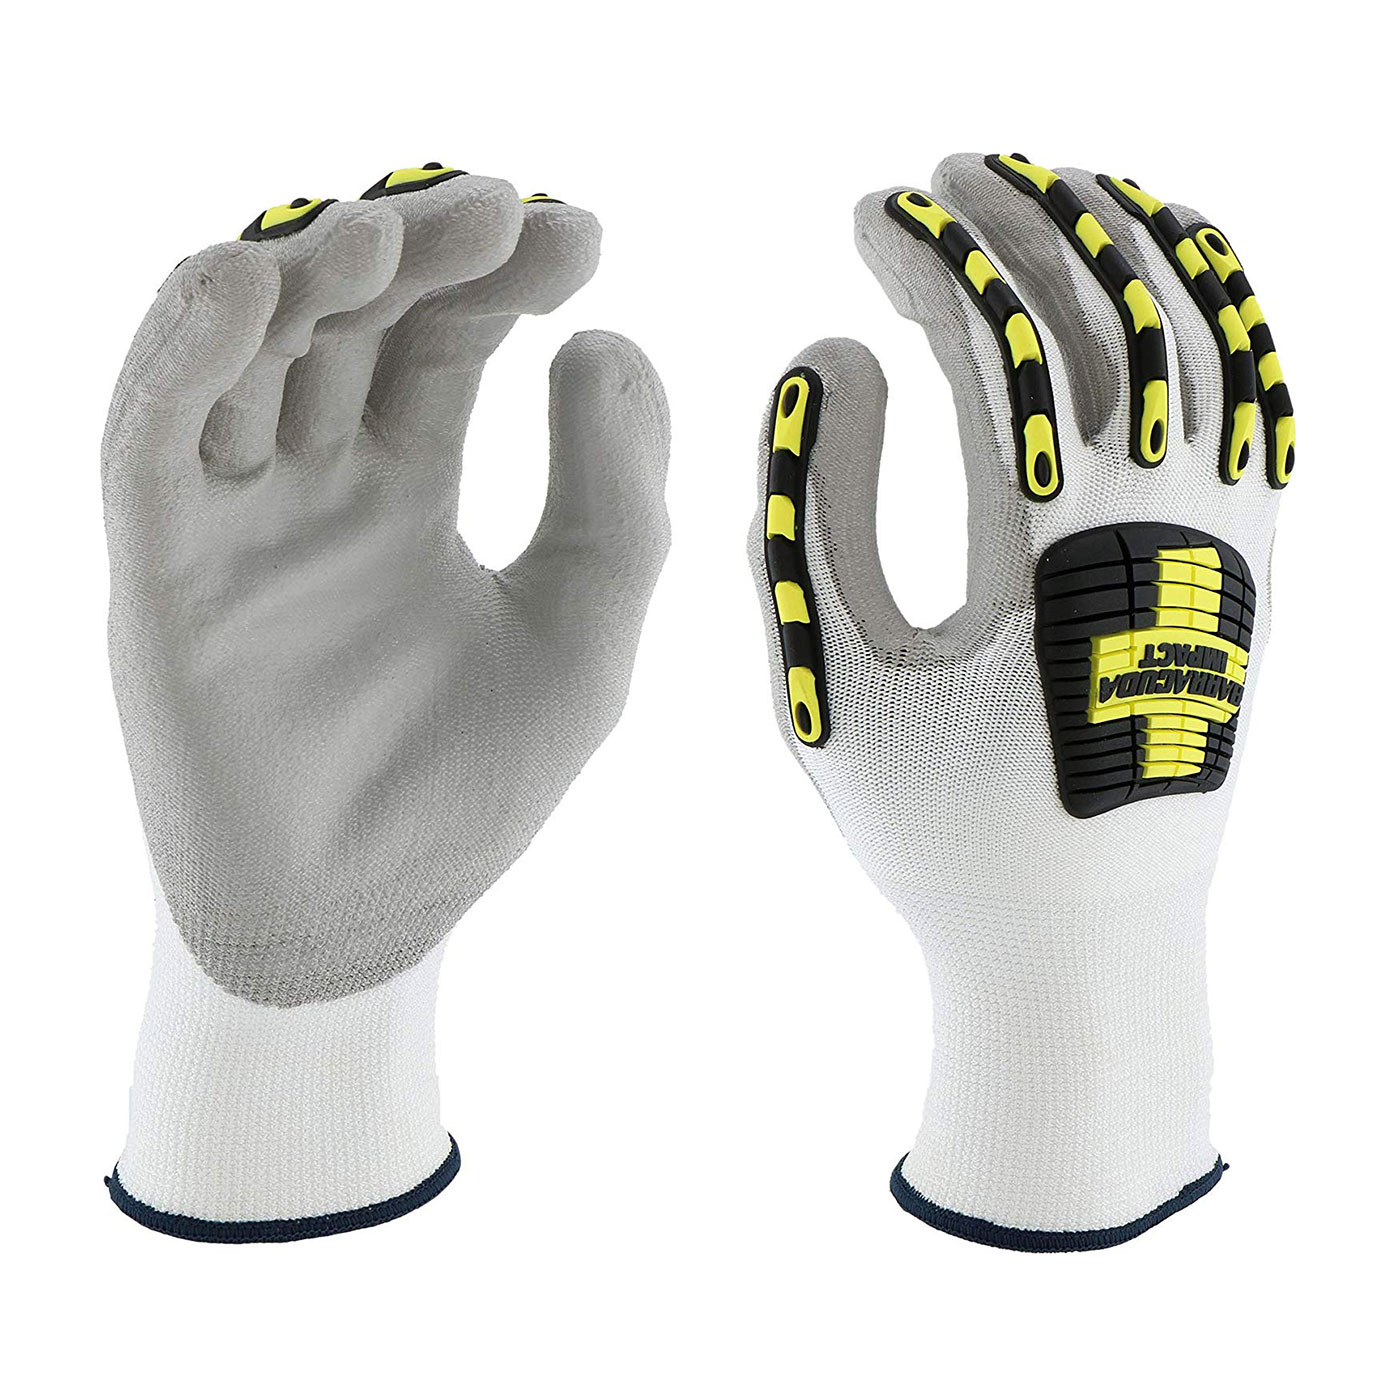 #713HGWUB PIP® West Chester Barracuda Seamless Knit Glove with Impact Protection and PU Coated Palm Grip